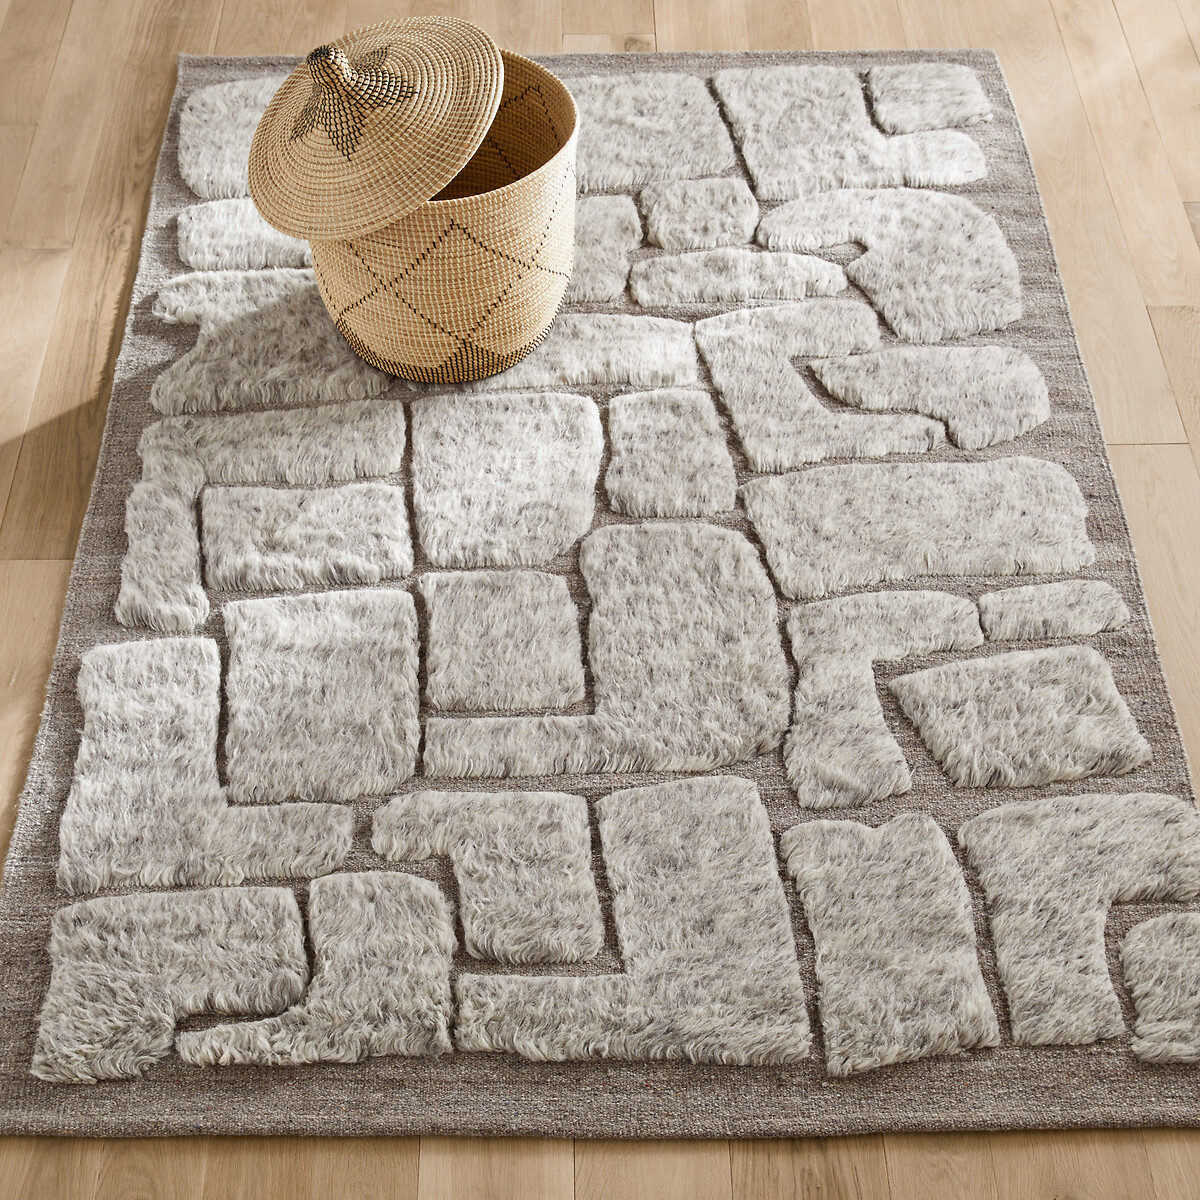 Teocali Hand-Knotted Heather Wool Rug